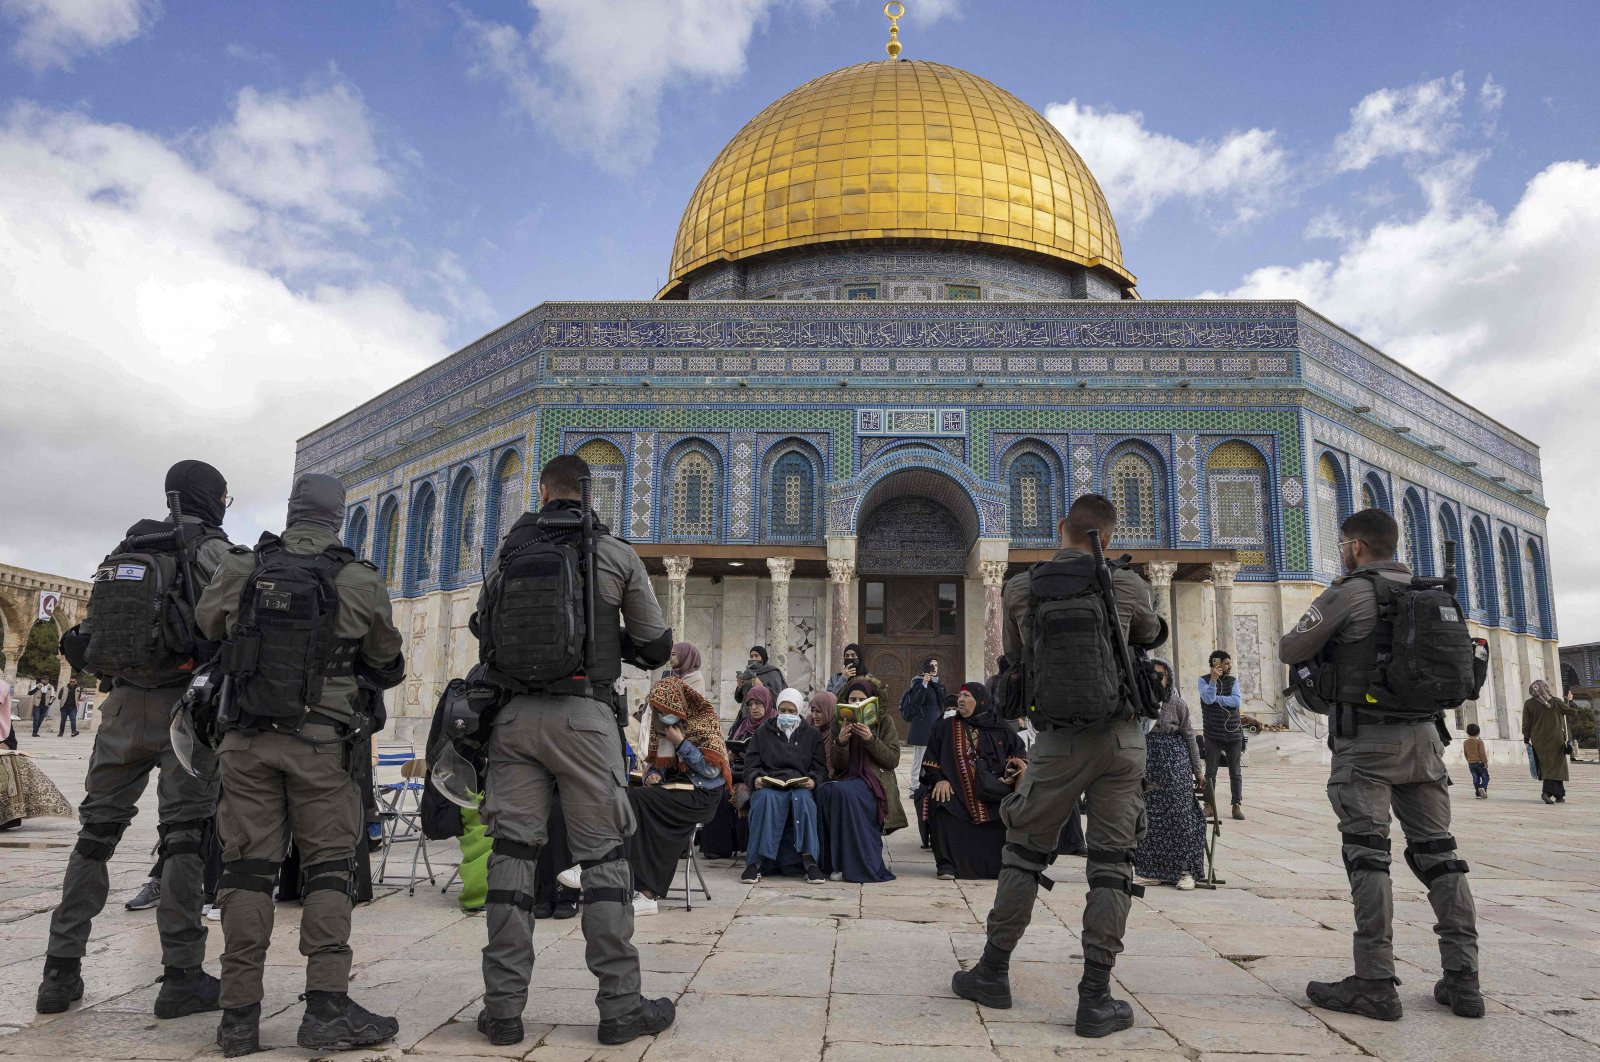 Israeli police stand in front of Muslim women praying in front of the Dome of the Rock as a group of Jewish people visit the Temple Mount at Al-Aqasa Mosque complex in occupied East Jerusalem, Palestine, April 20, 2022. (AFP Photo)